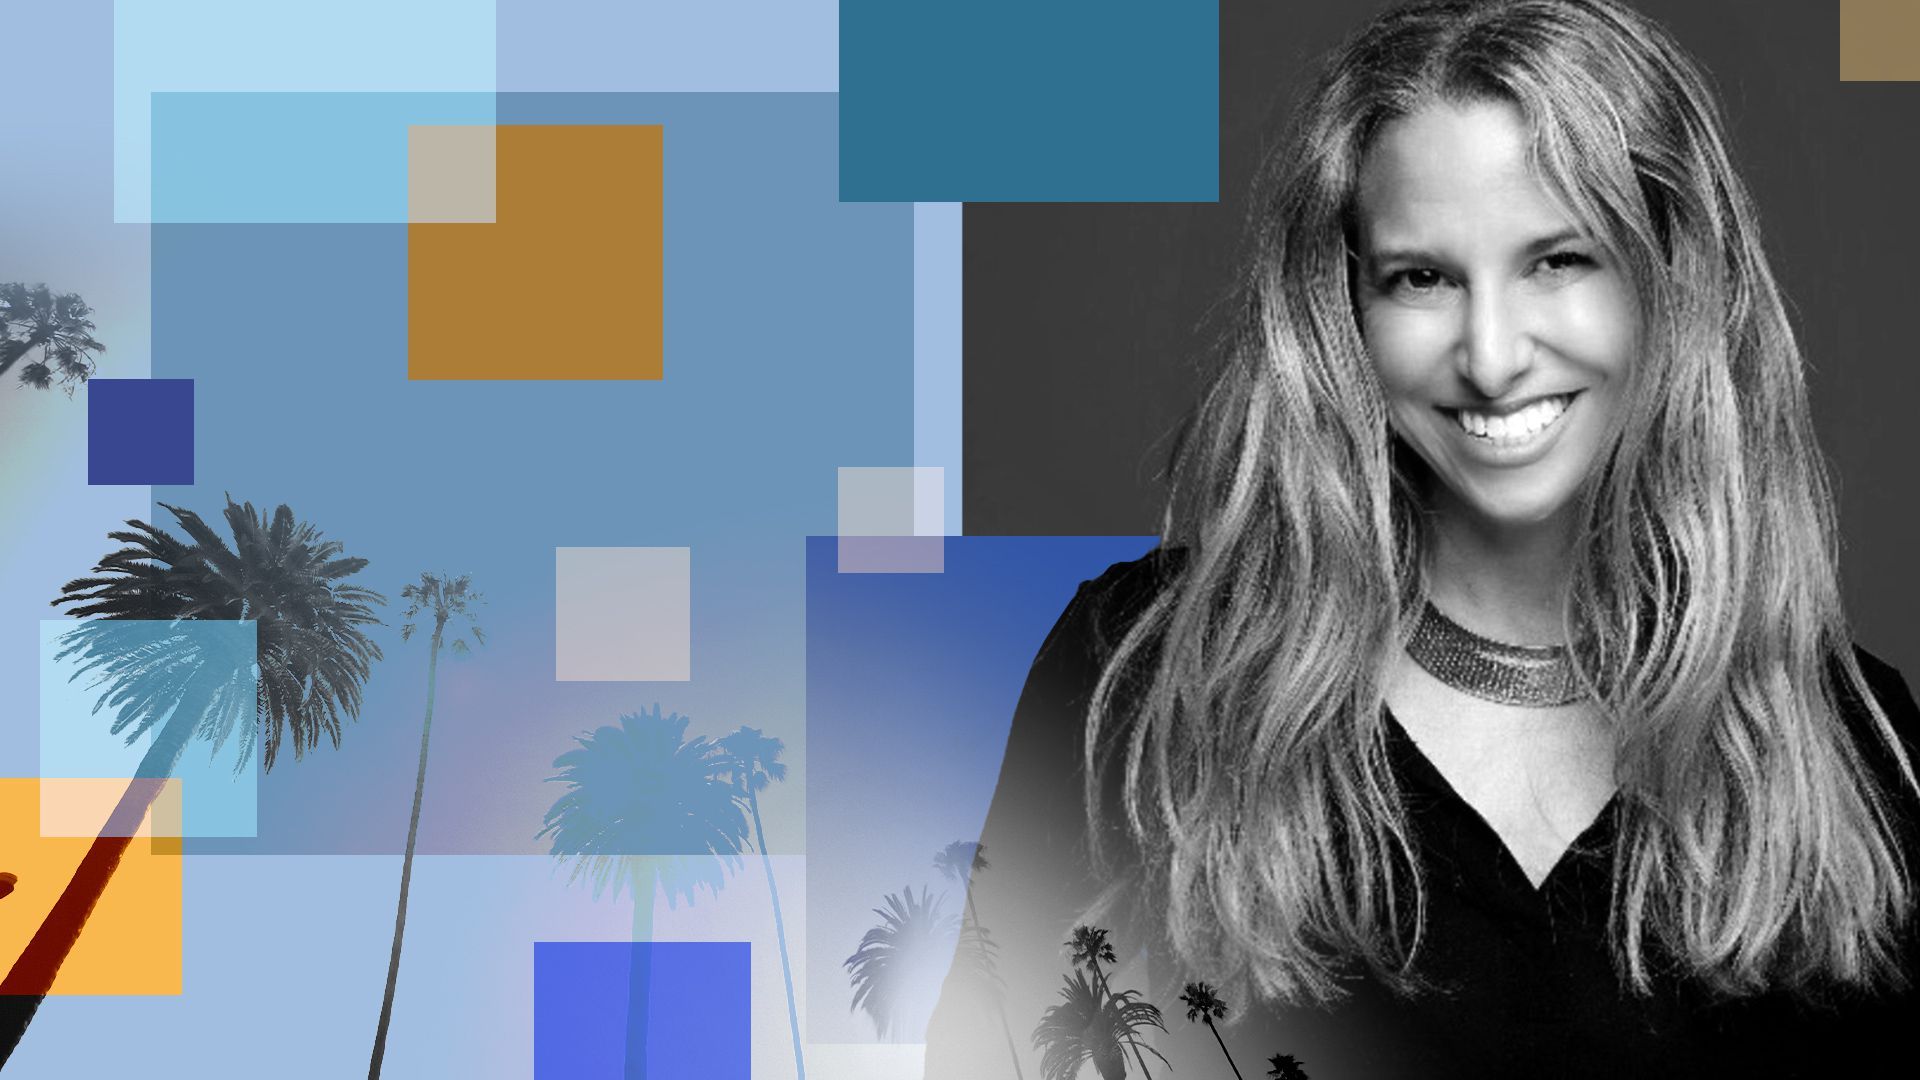 Photo illustration of Joanna Popper with palm trees and abstract shapes.